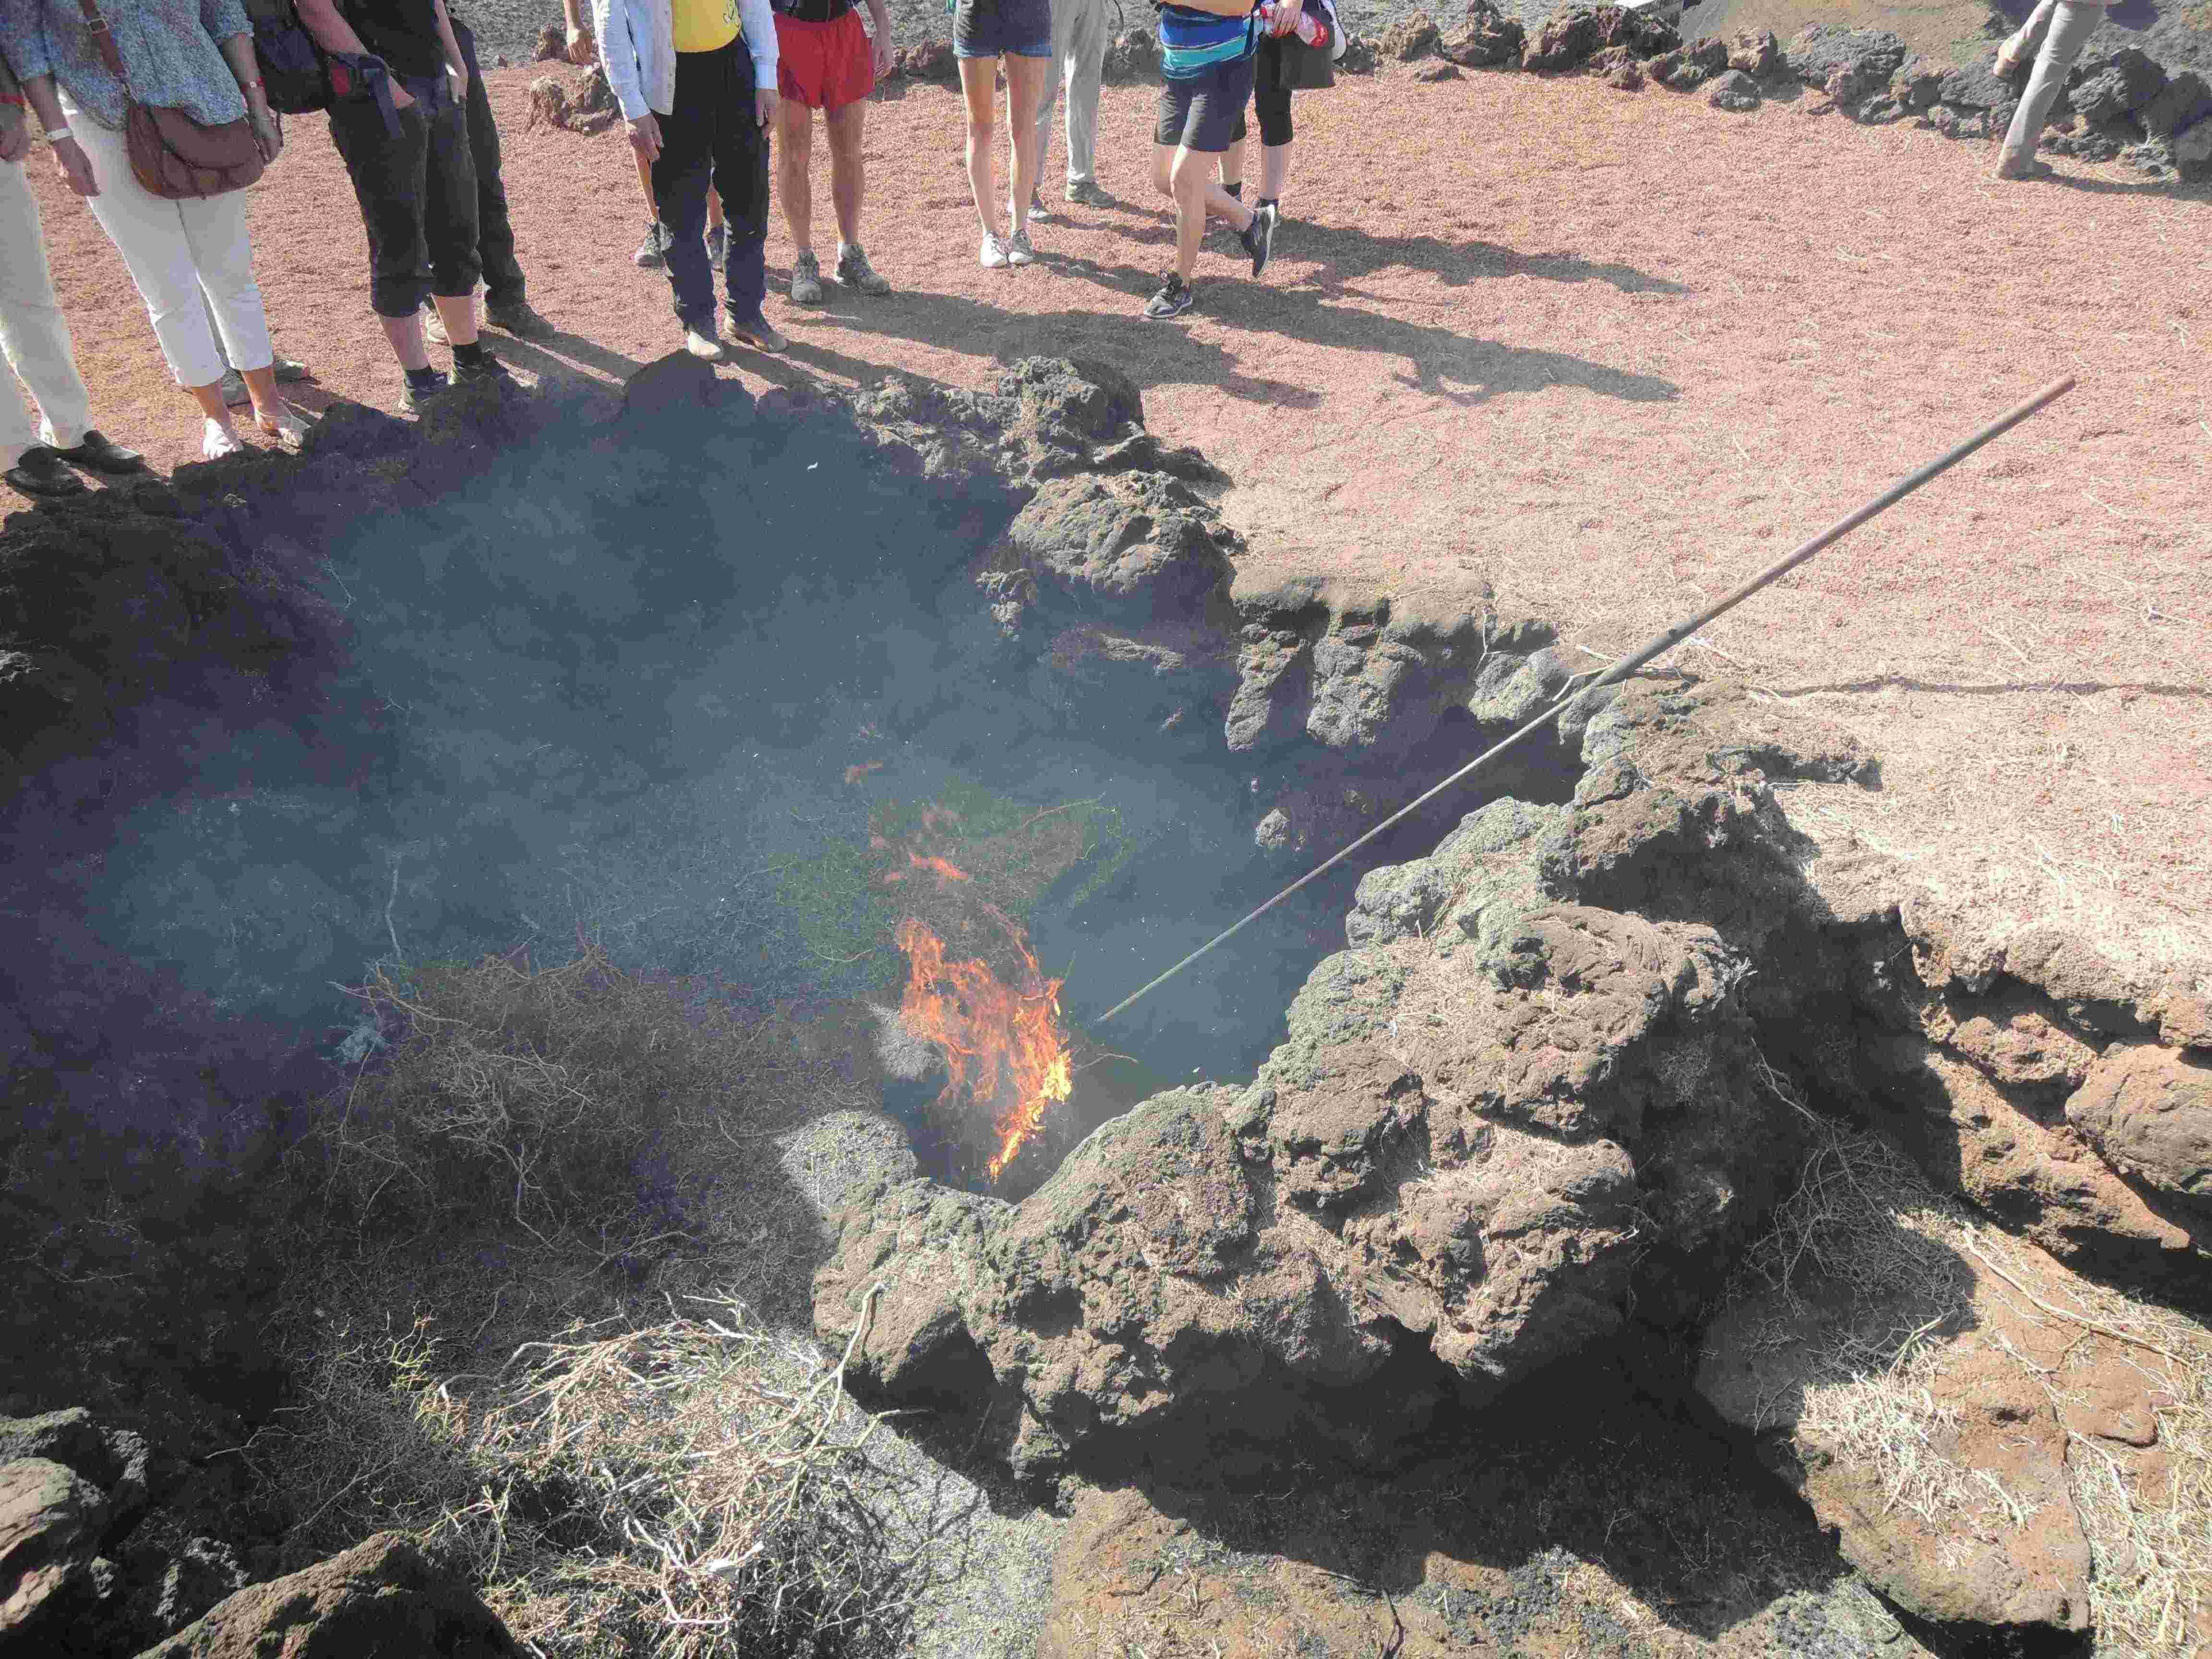 Tourists are shown how sagebrush in a hole close to hot lava will burn